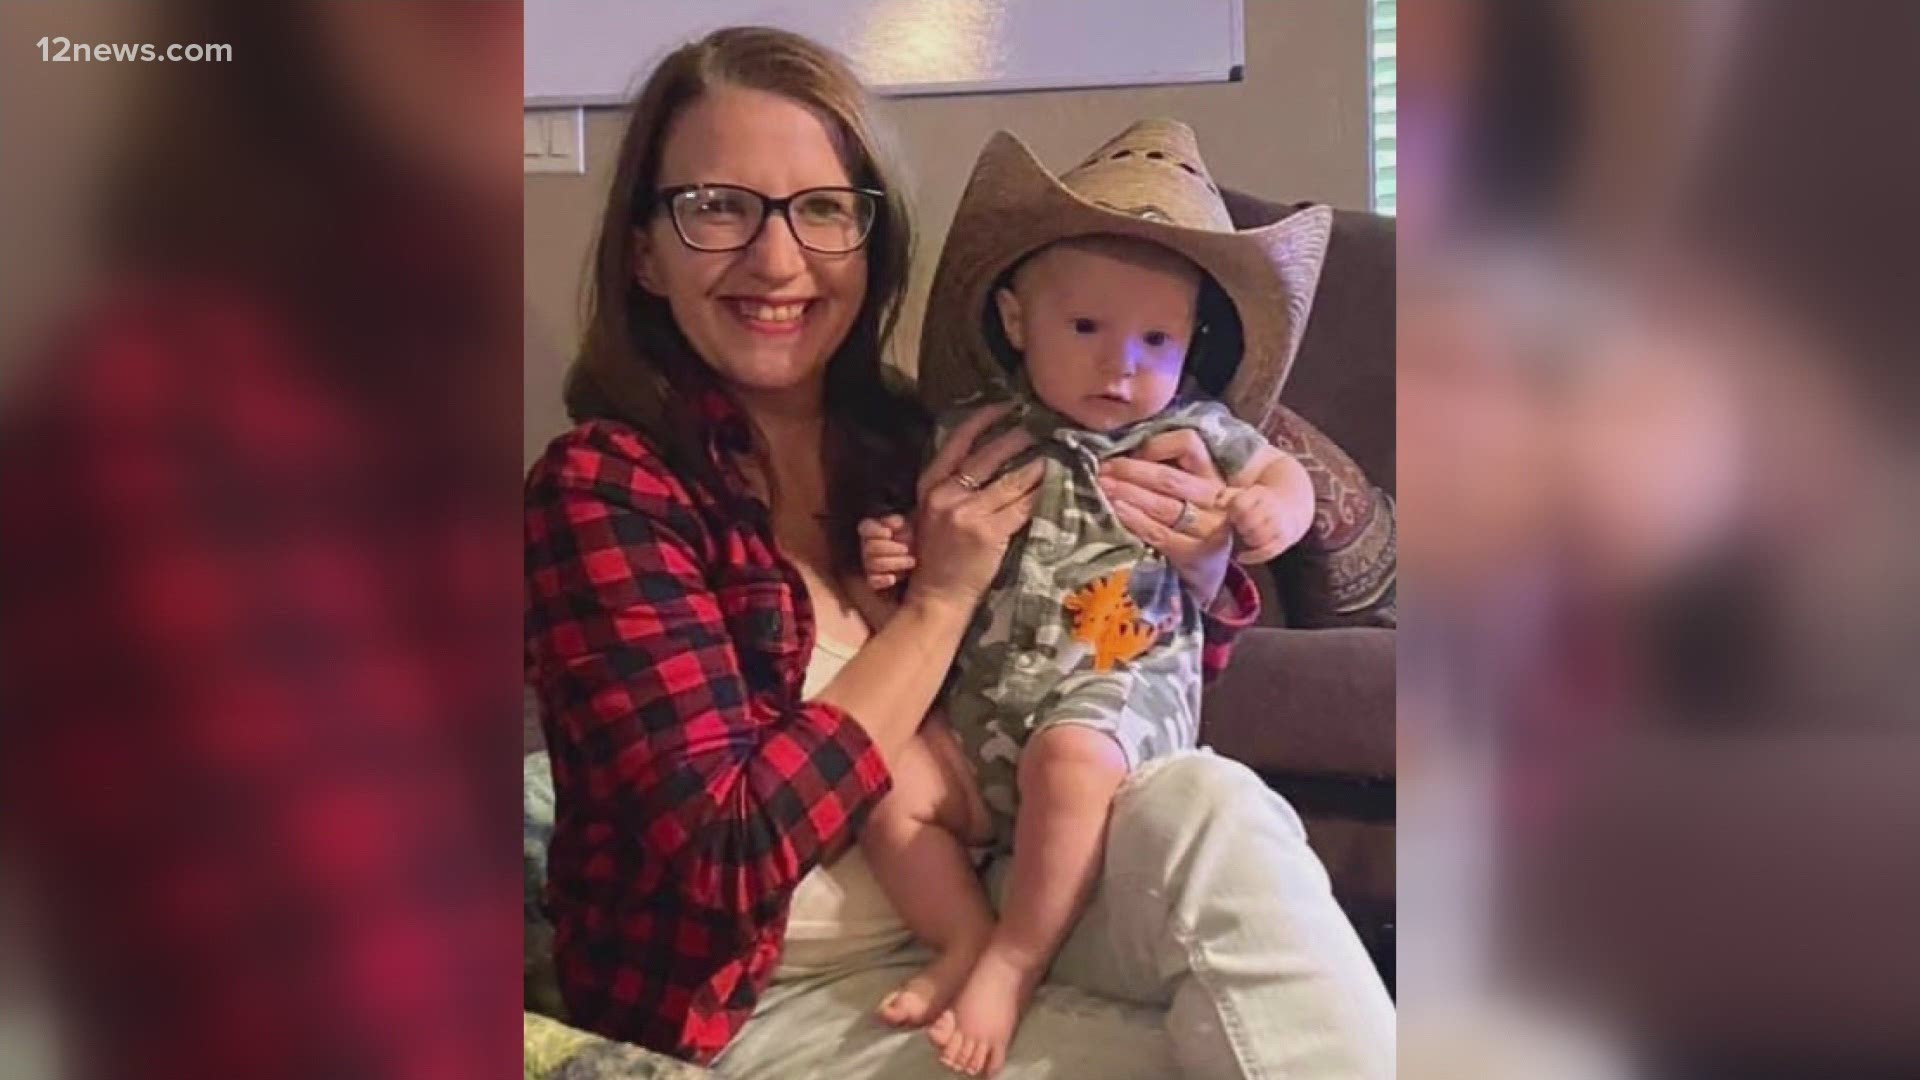 Brittany Martie was killed while trying to prevent her 10-month-old son from being kidnapped by Eric Maes. Family and friends remember she had always wanted to be a